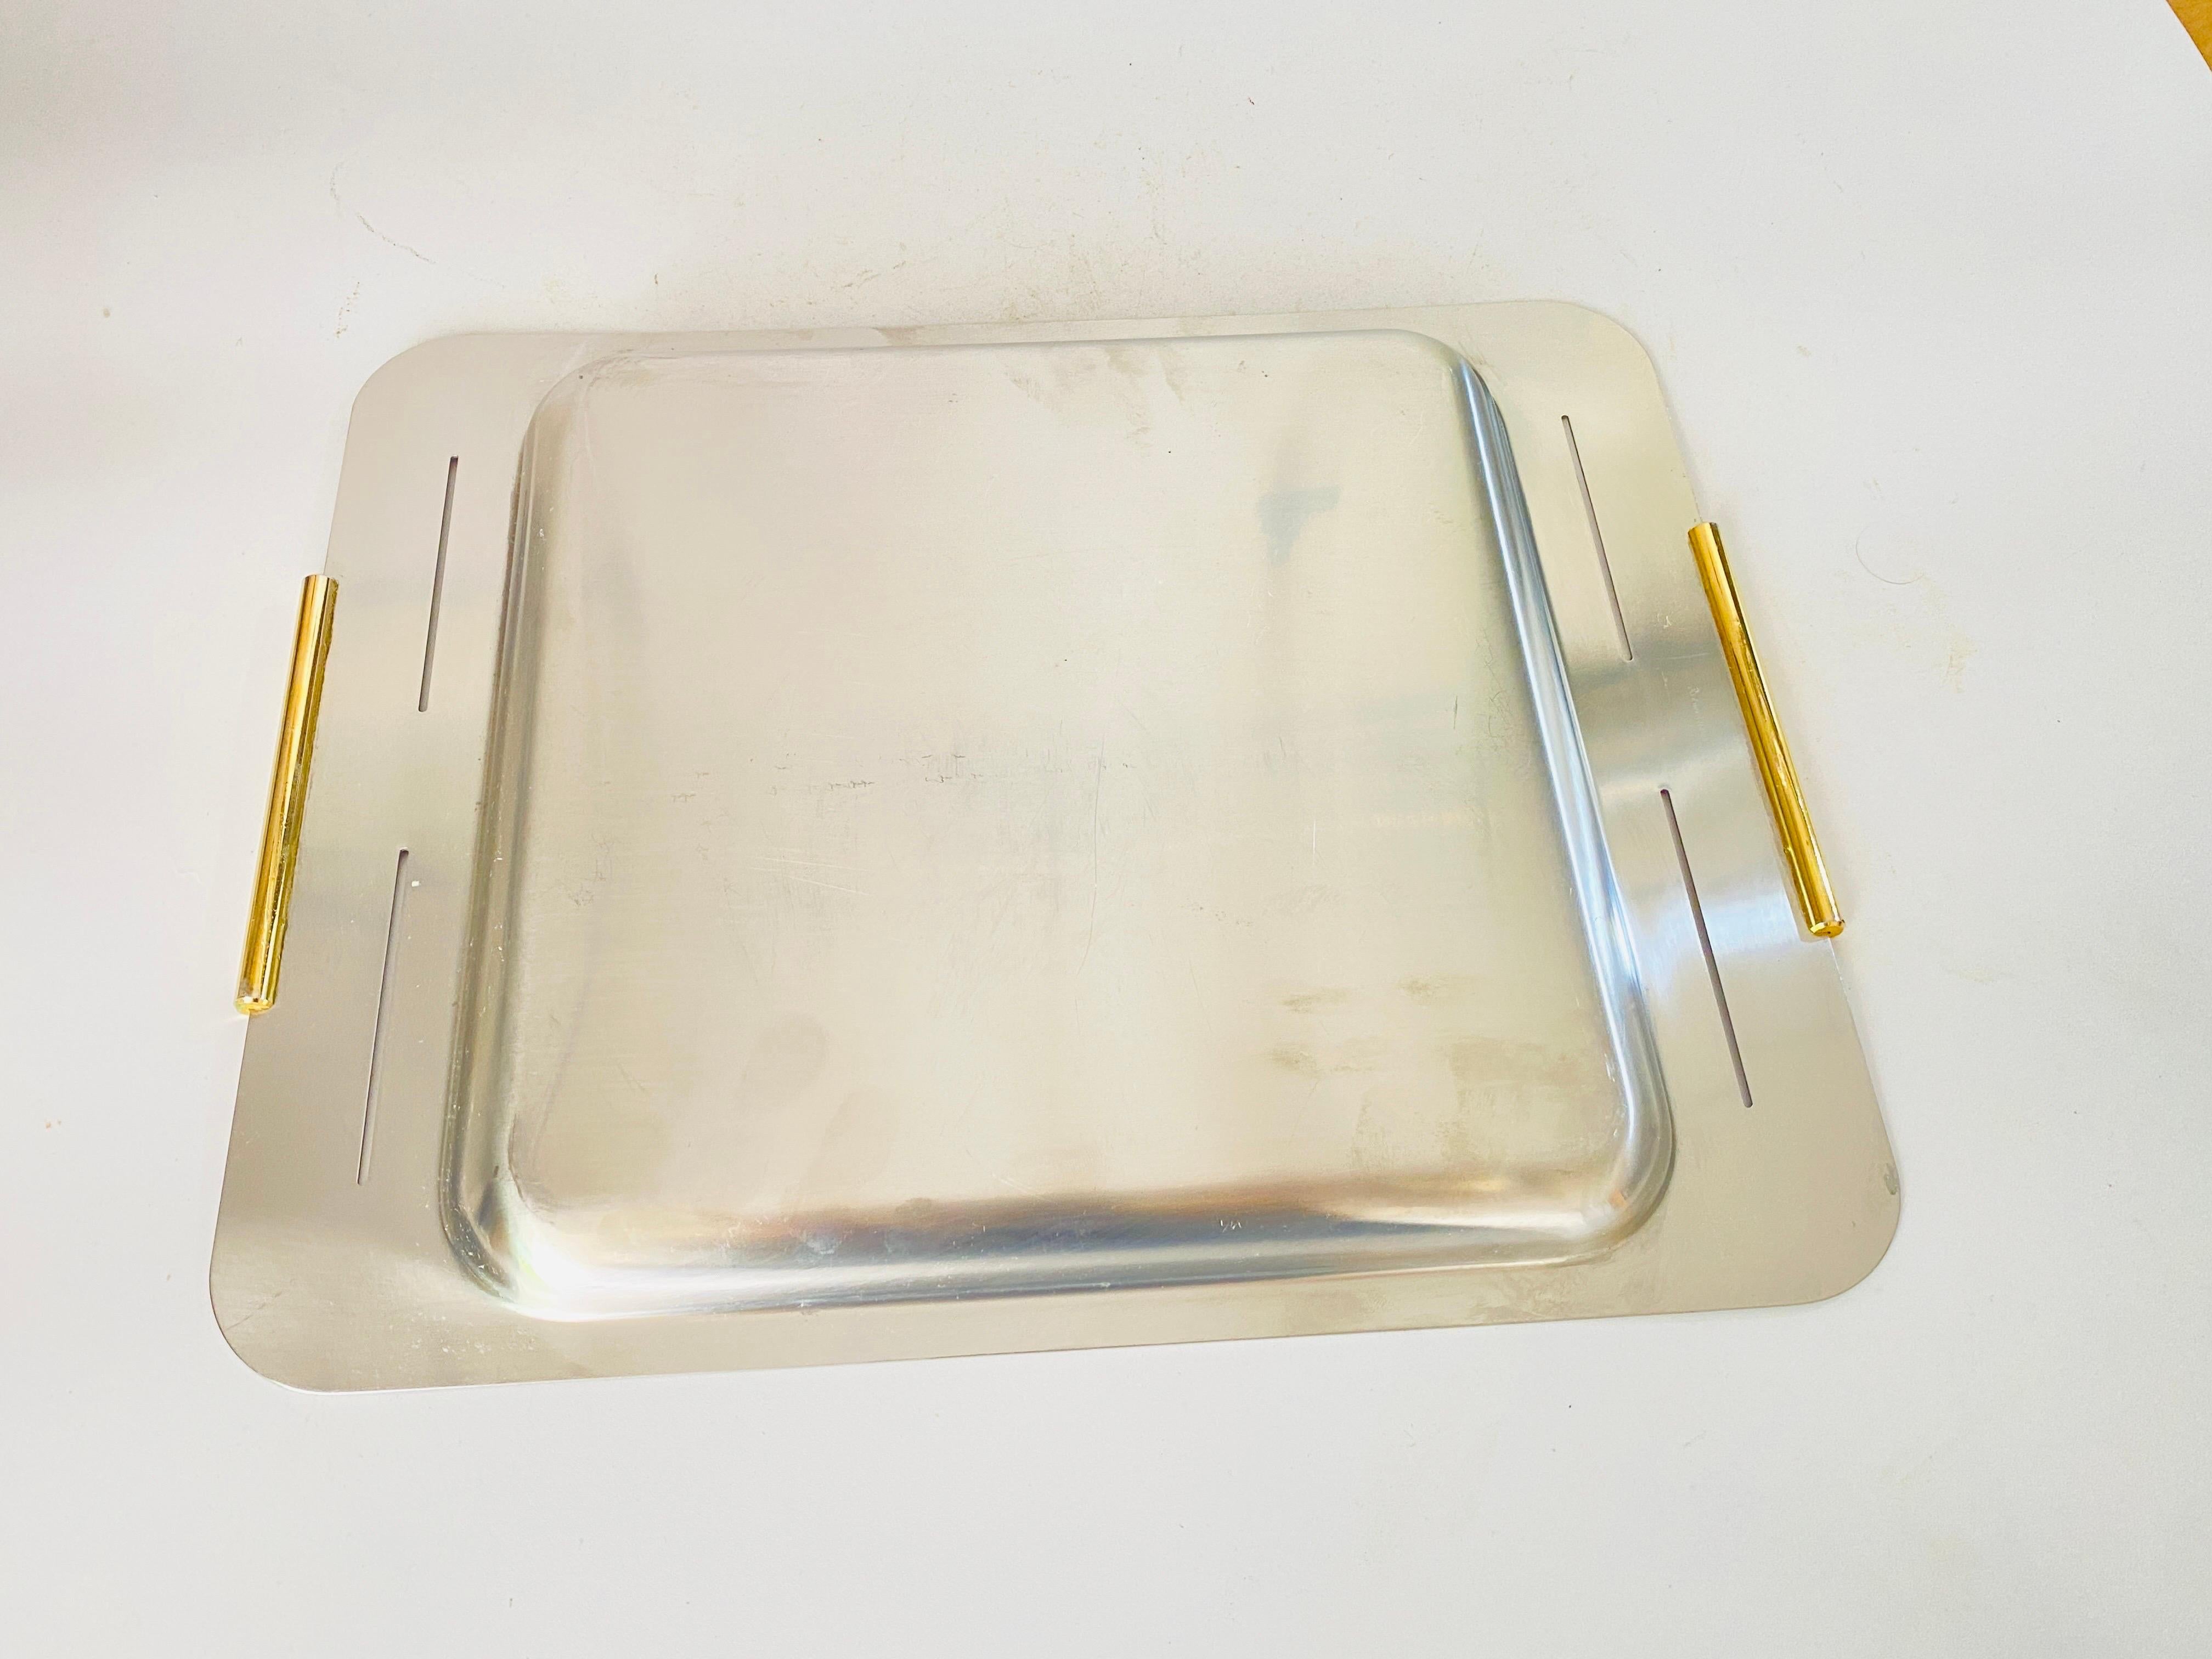 Art Deco French Chrome Serving Tray by Zanetti 1970 Italy Silver Color For Sale